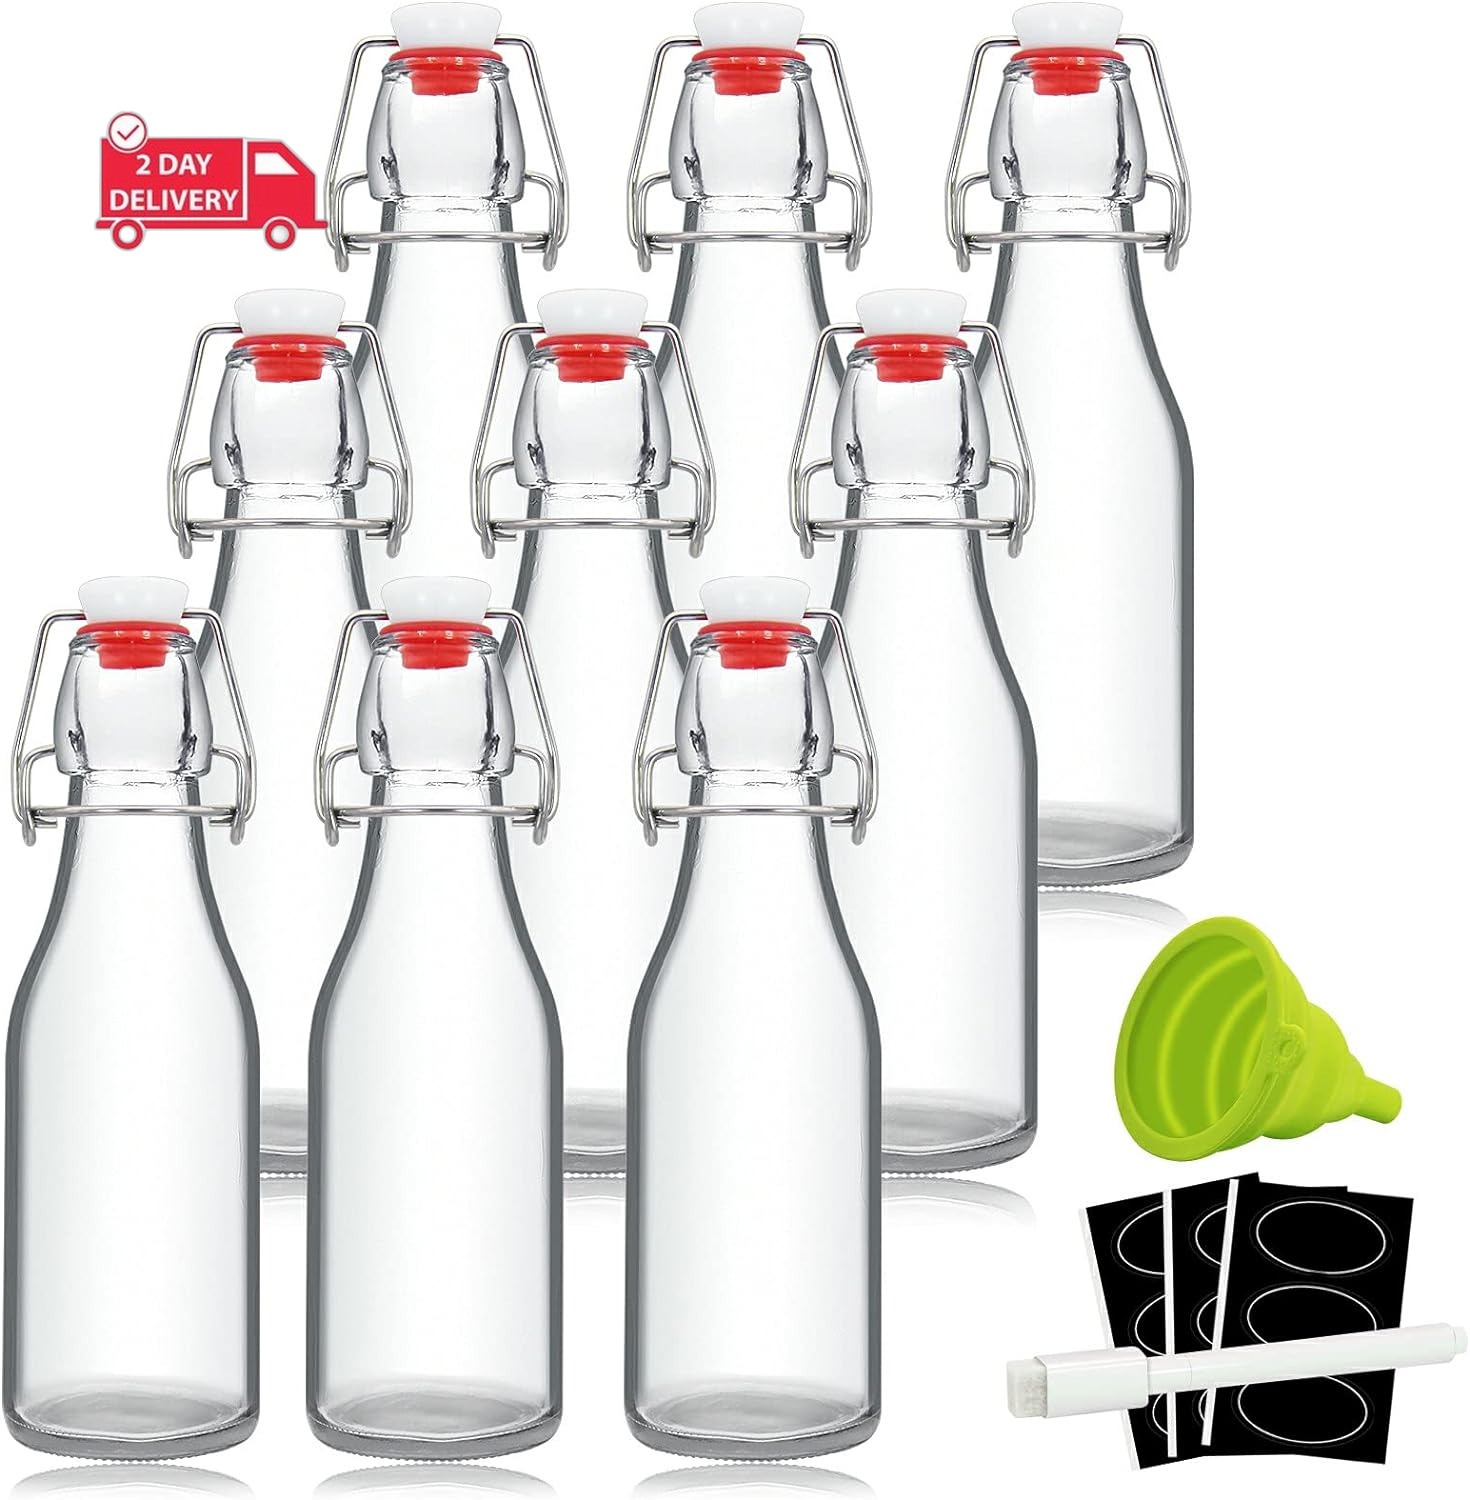 8Oz Swing Top Bottles - Glass Beer Bottle with Airtight Rubber Seal Flip Caps fo